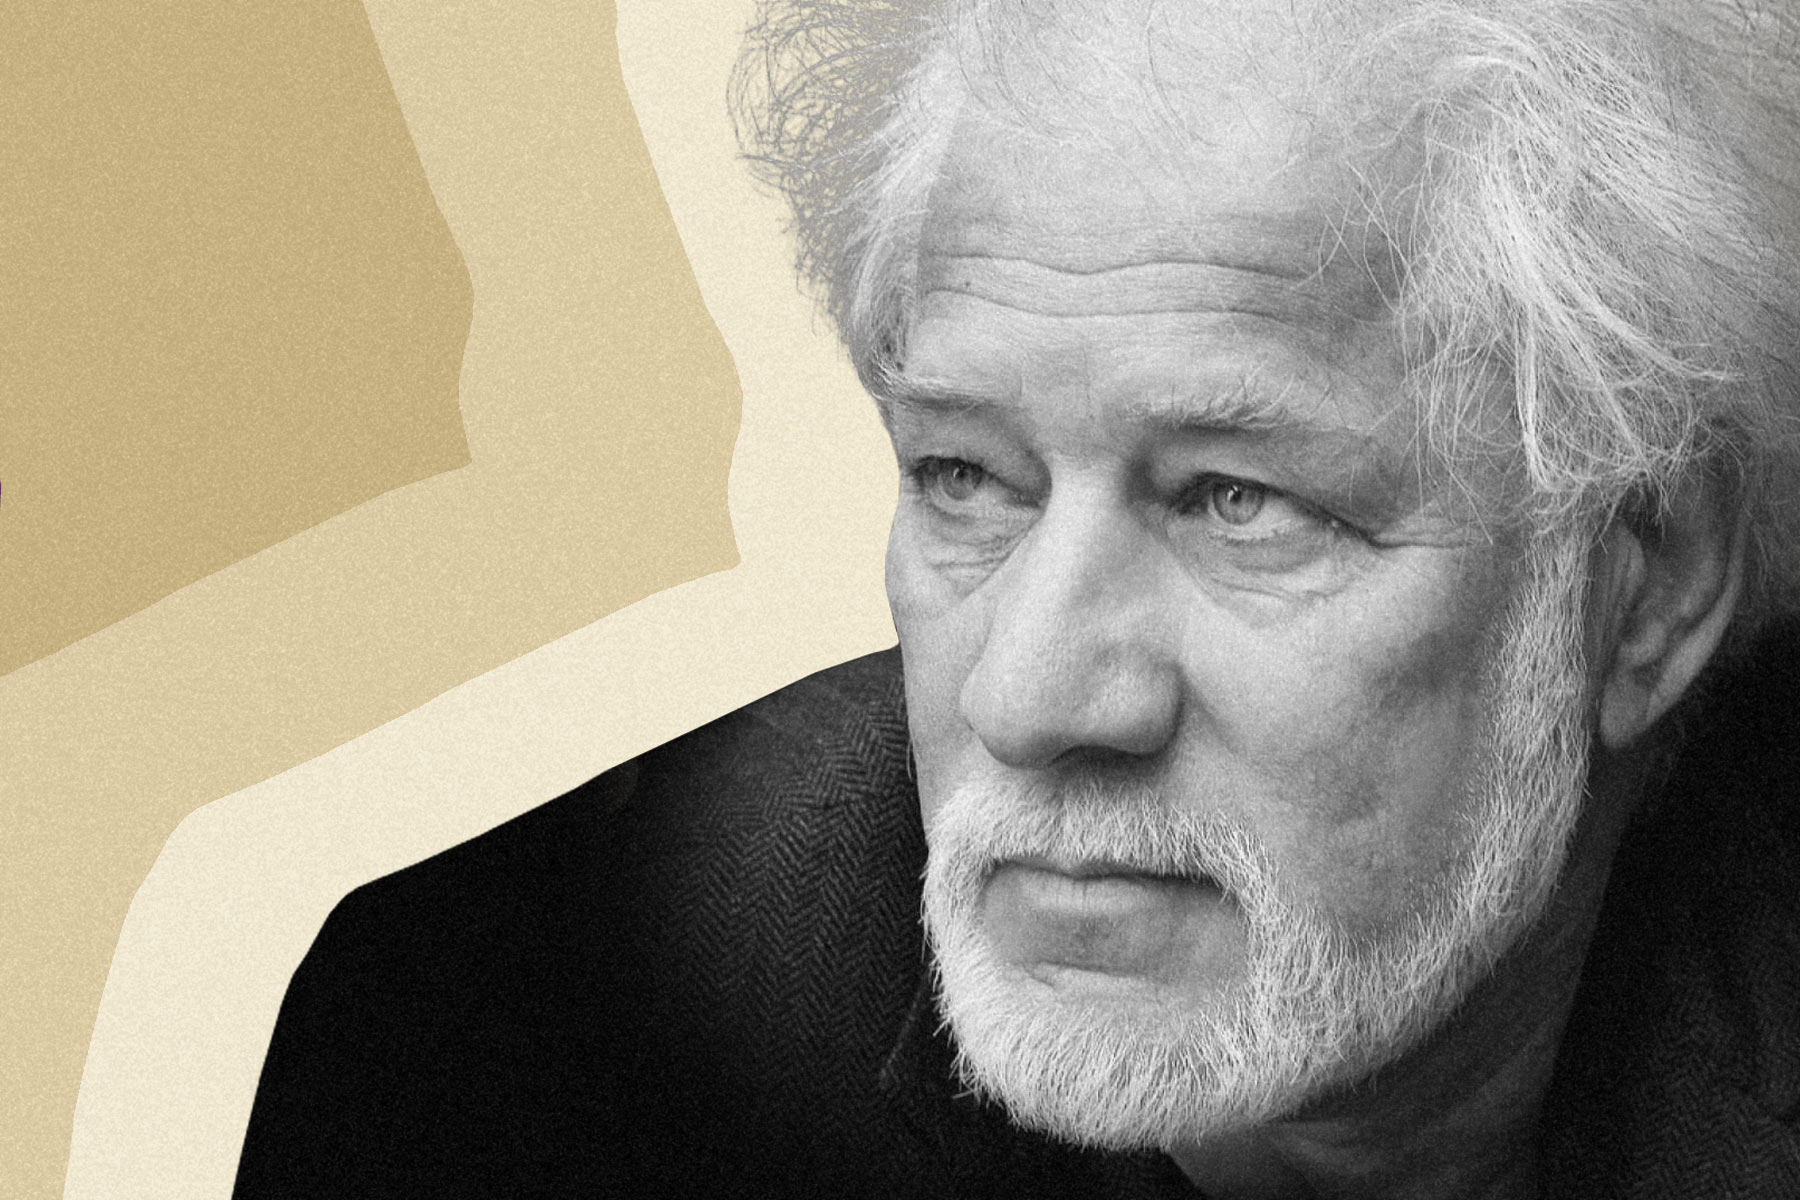 A black-and-white portrait of Michael Ondaatje with a beige background.